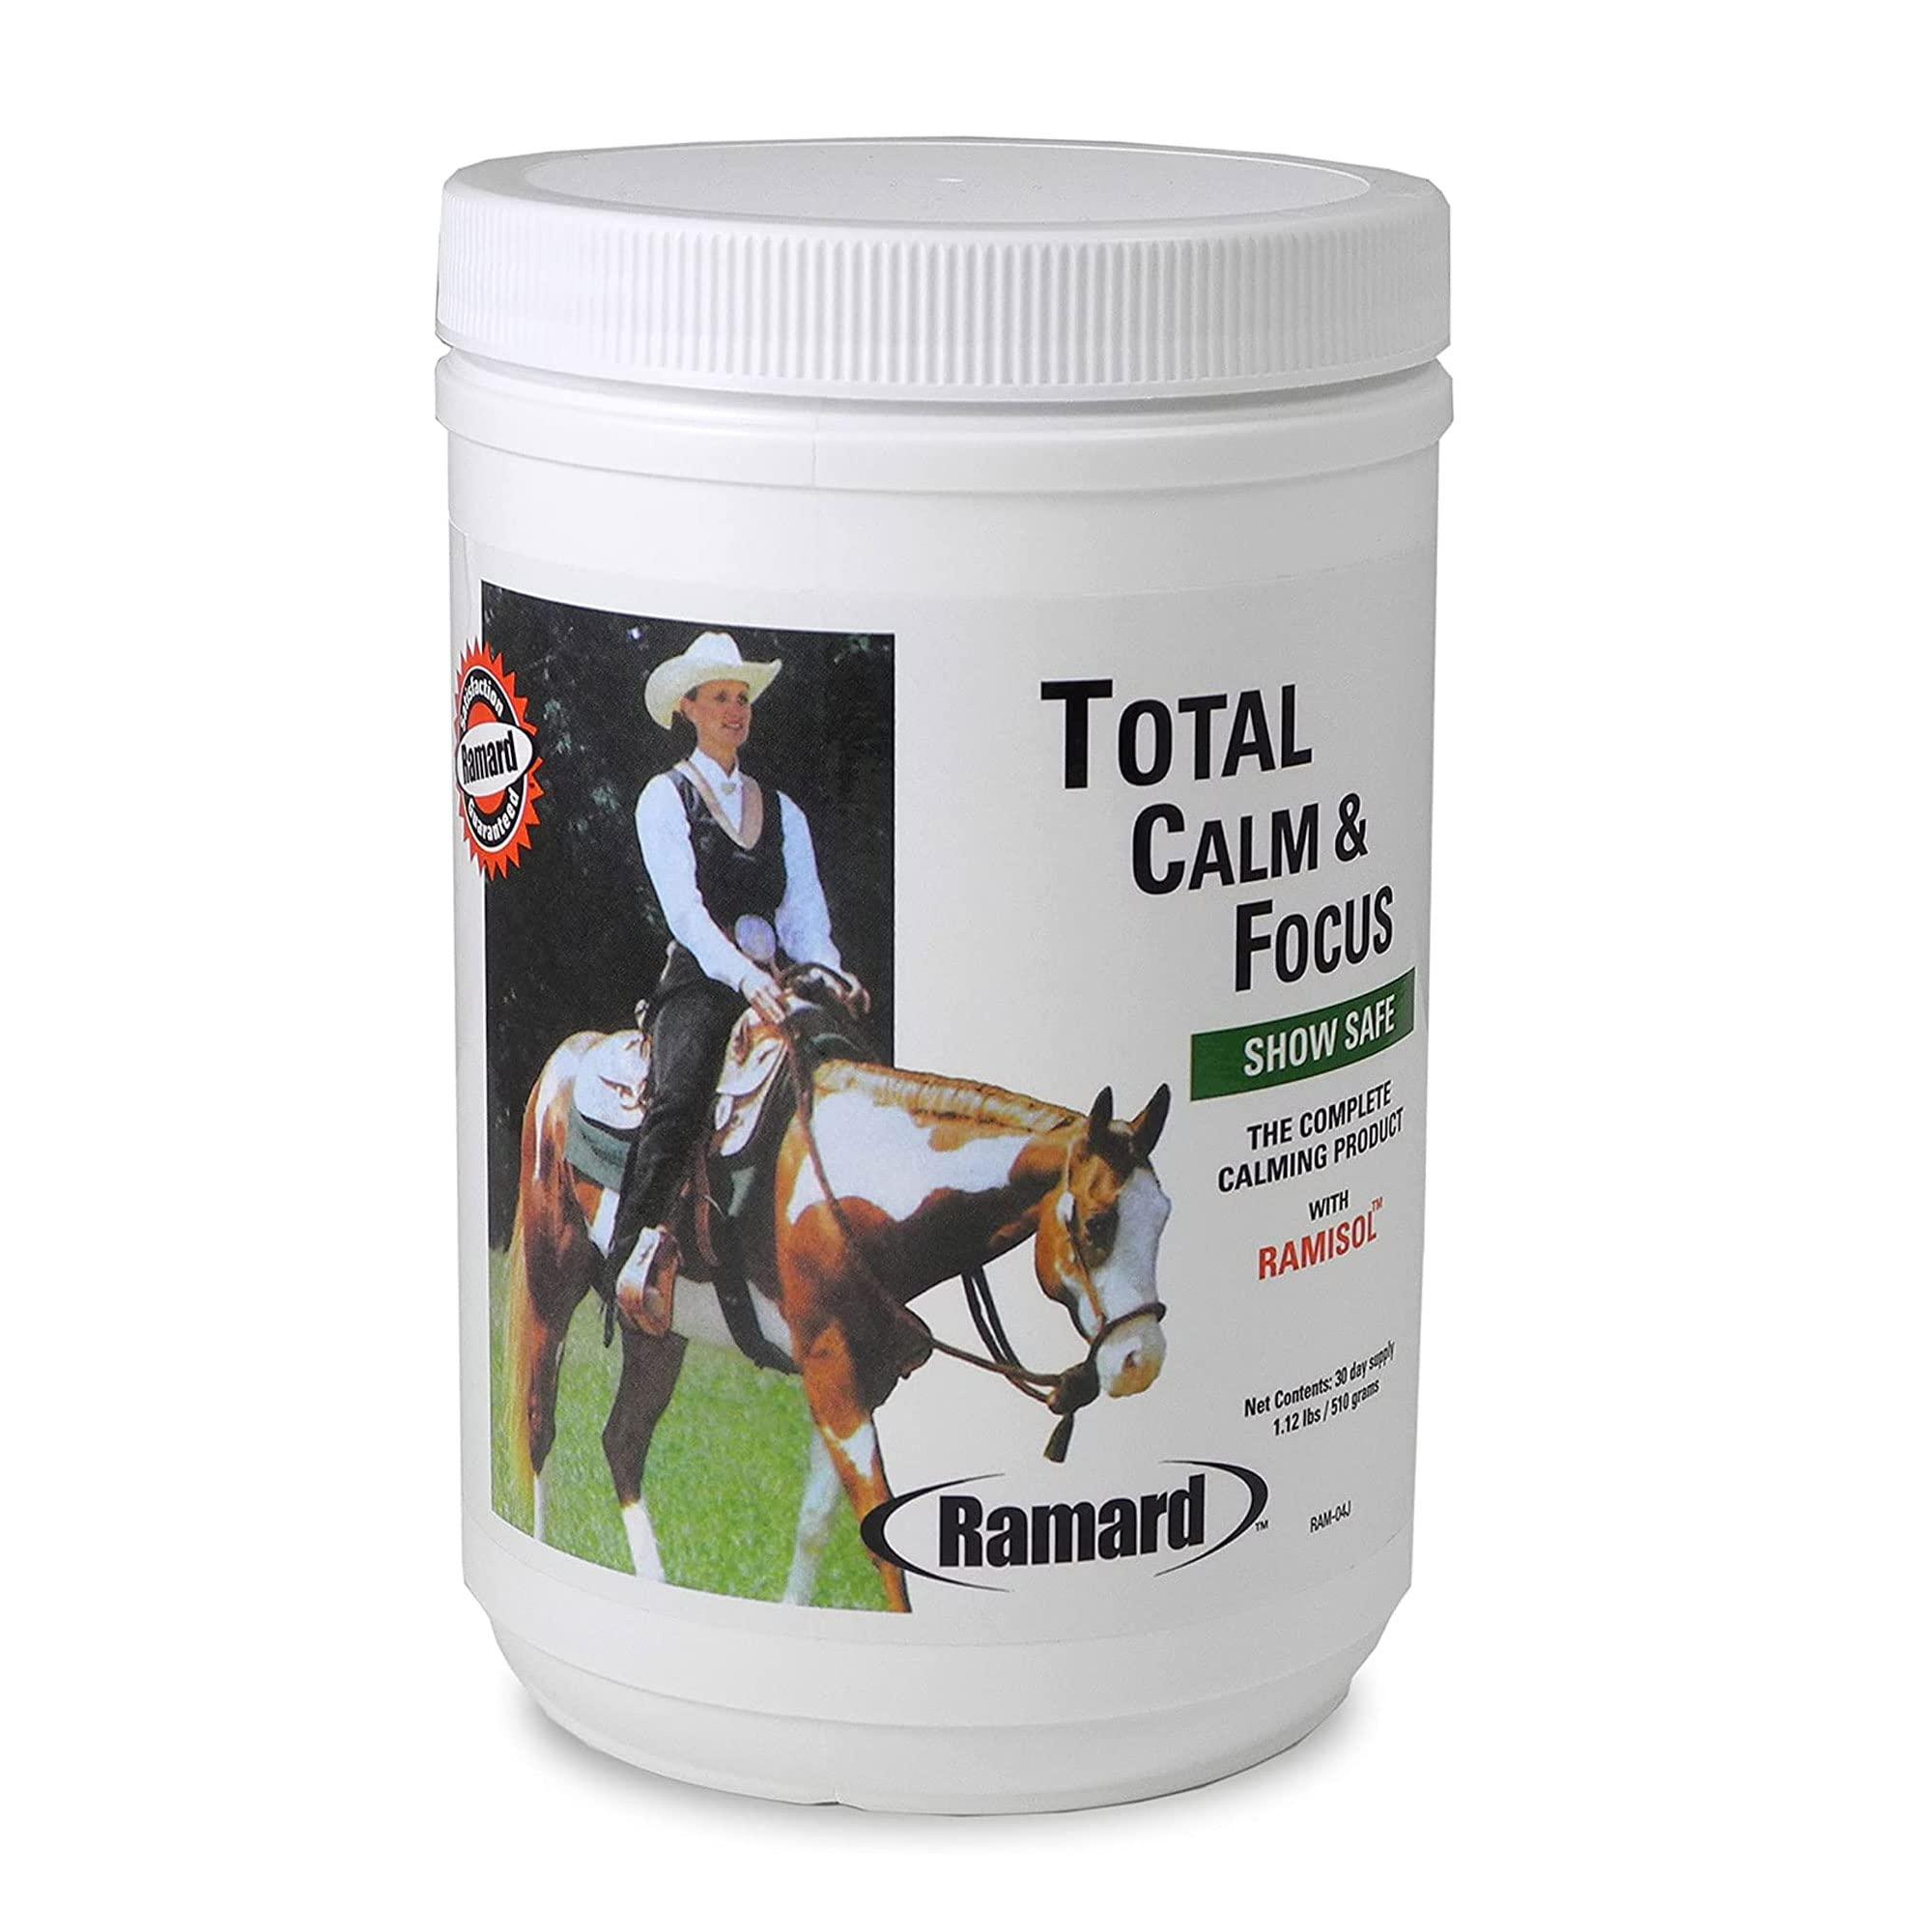 Ramard Total Calm and Focus Prime & Nutritional Powder For Race Horses | Contains Magnesium & Vitamin B for Race Events & Training | Aids in Reducing Nervousness & Hyper-activeness in Horses - 1.12 lb